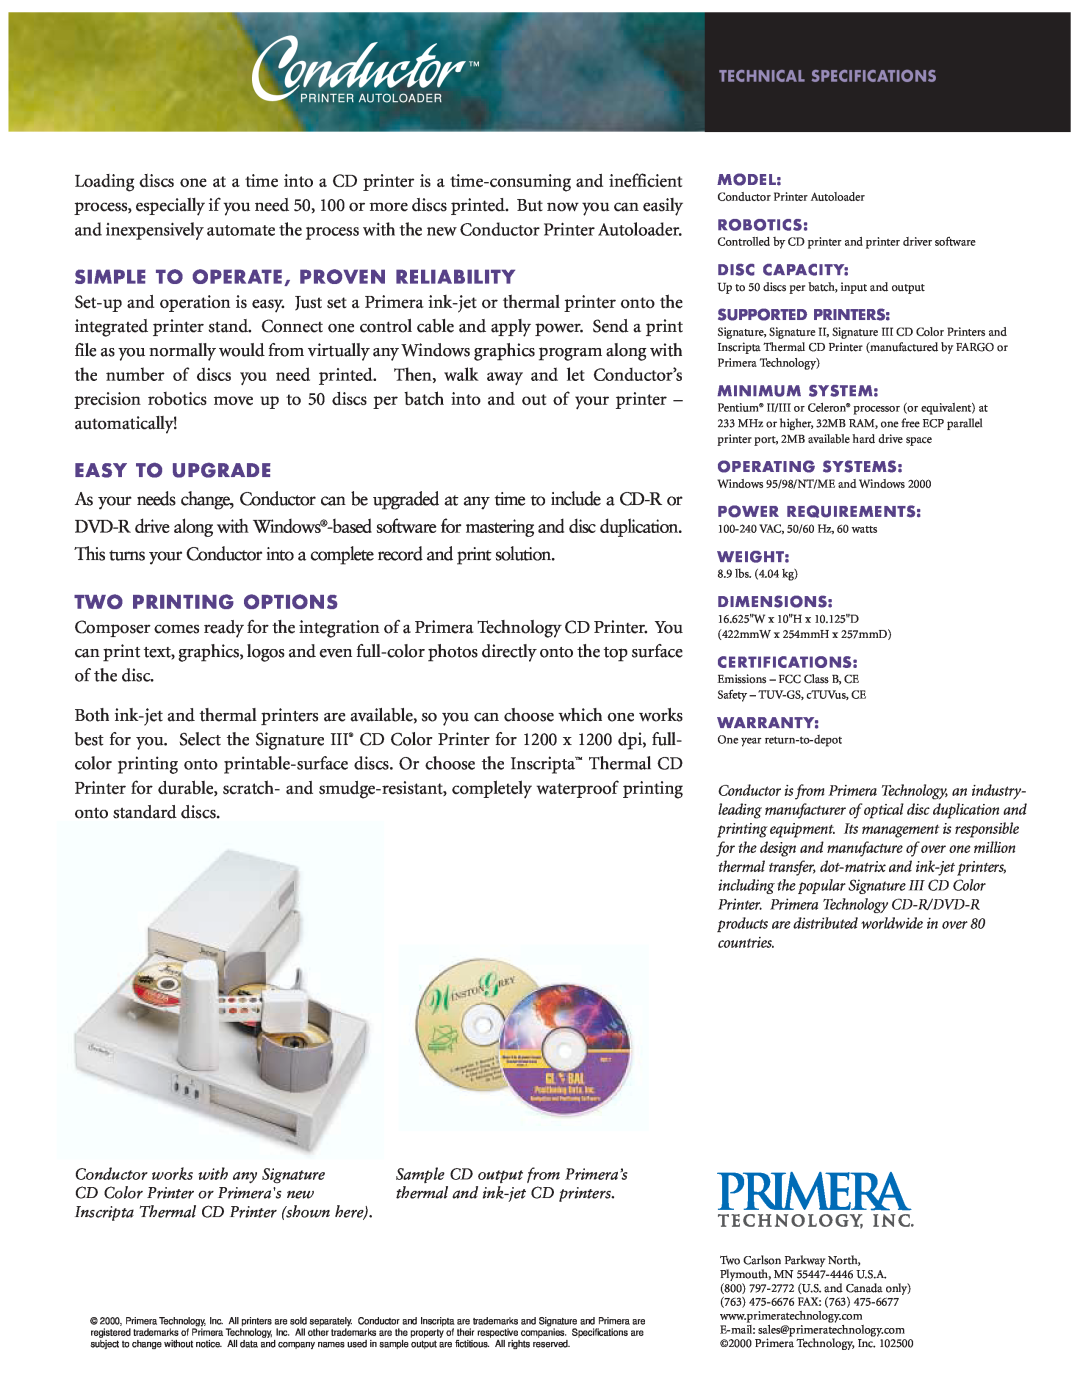 Primera Technology Conductor Printer manual Simple To Operate, Proven Reliability, Easy To Upgrade, Two Printing Options 